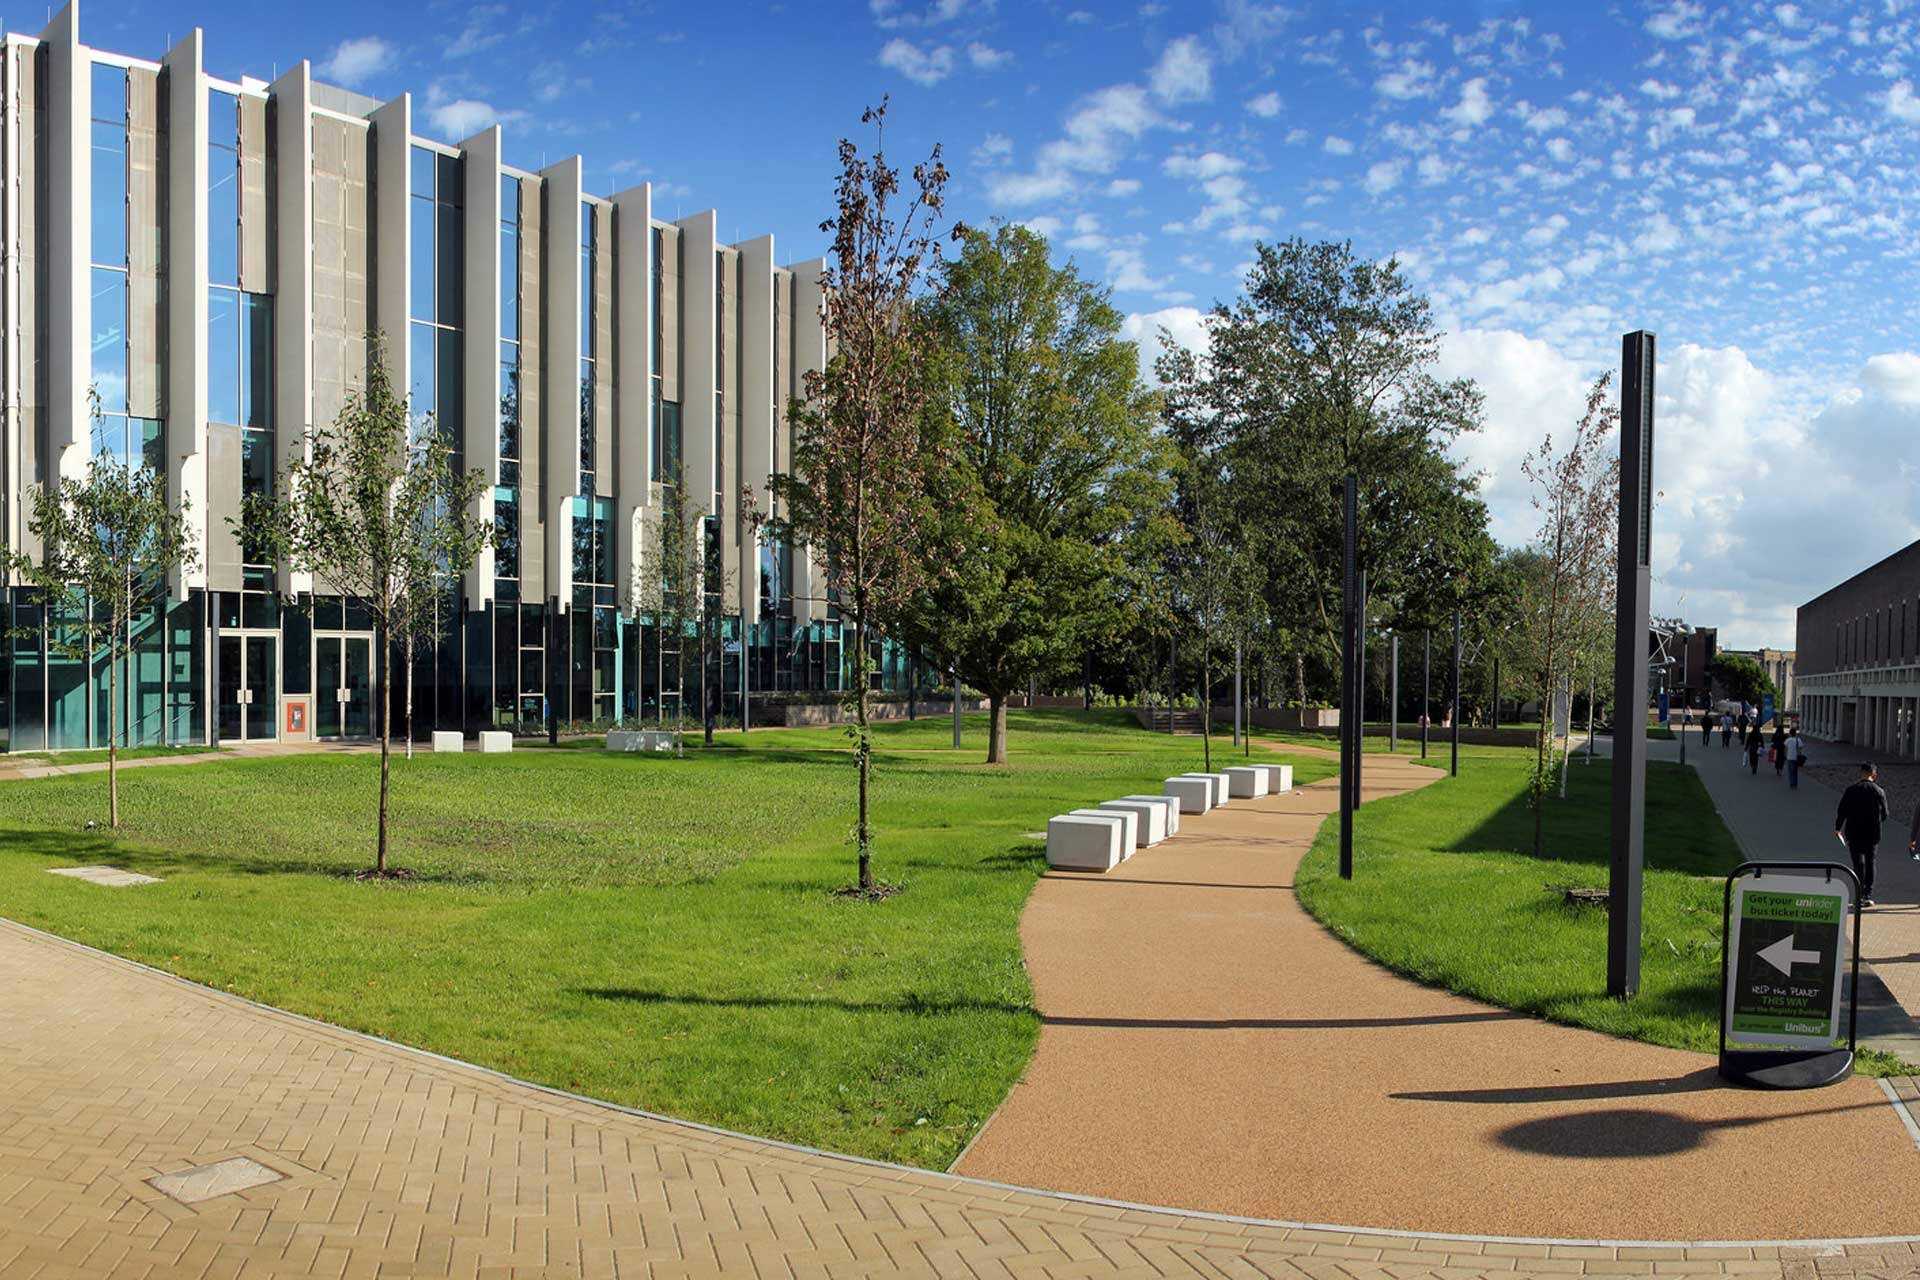 Green space with path and trees outside the Templeman Library